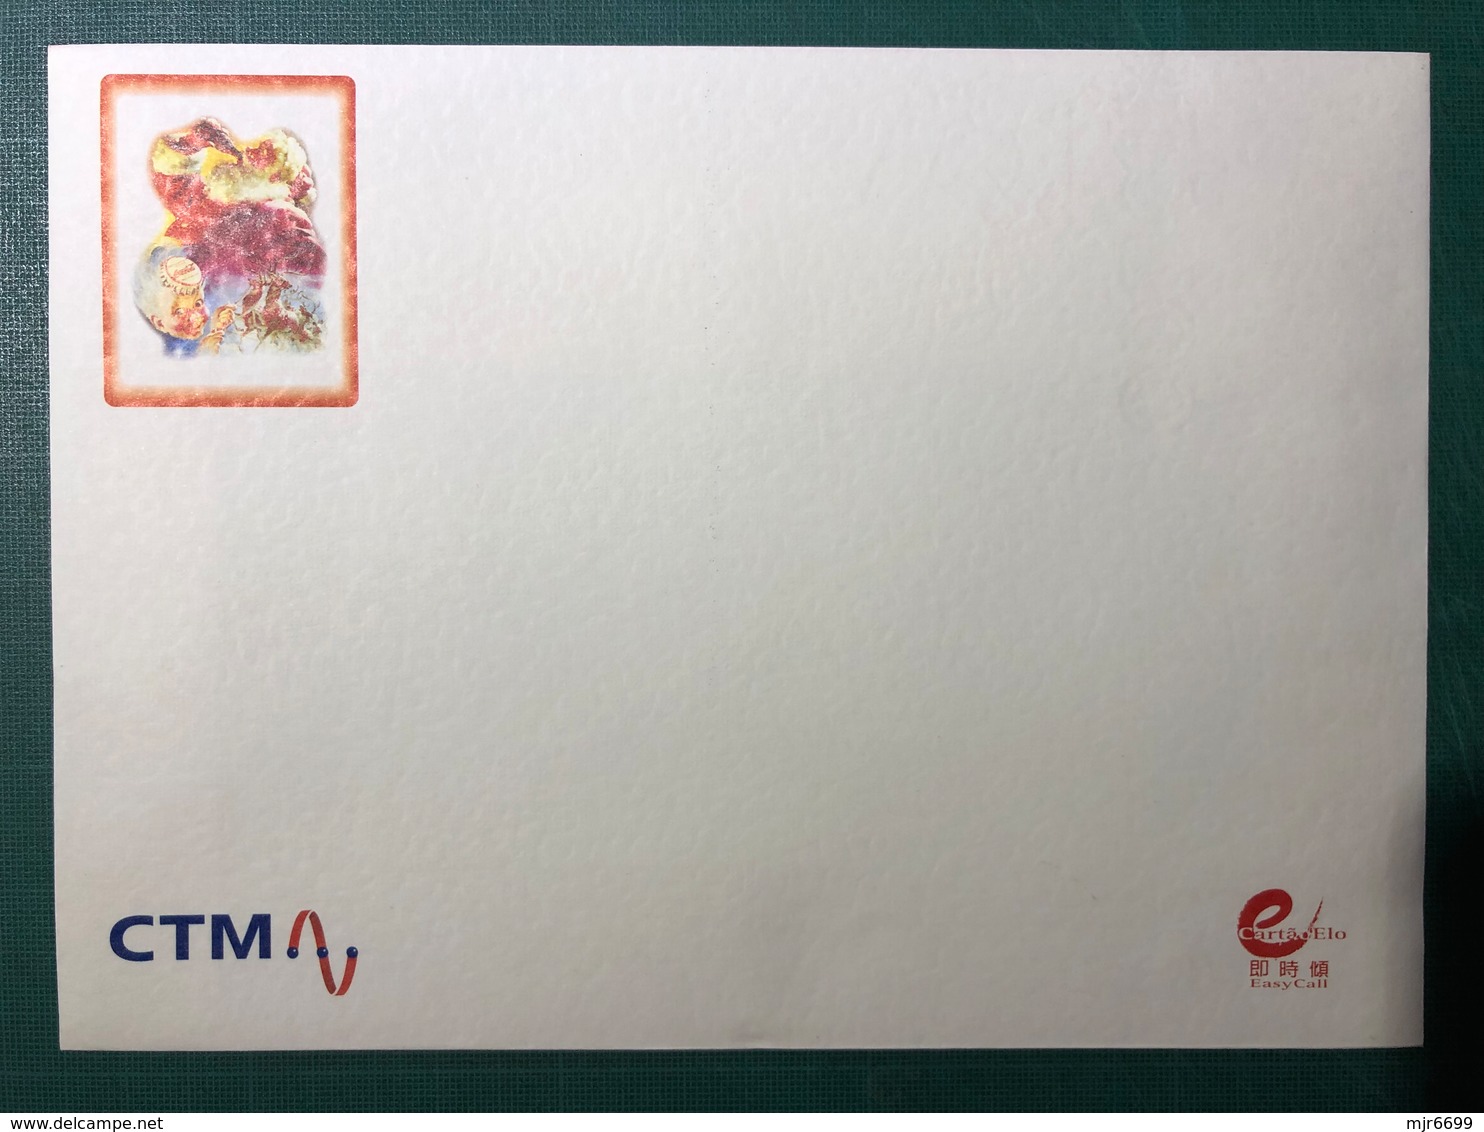 MACAU 1997\98 CTM PHONE CARD ISSUE FOR CHRITSMAS & NEW YEAR & COCACOLA. VERY SPECIAL WITH GREETING CARD & ENVELOPE - Macao